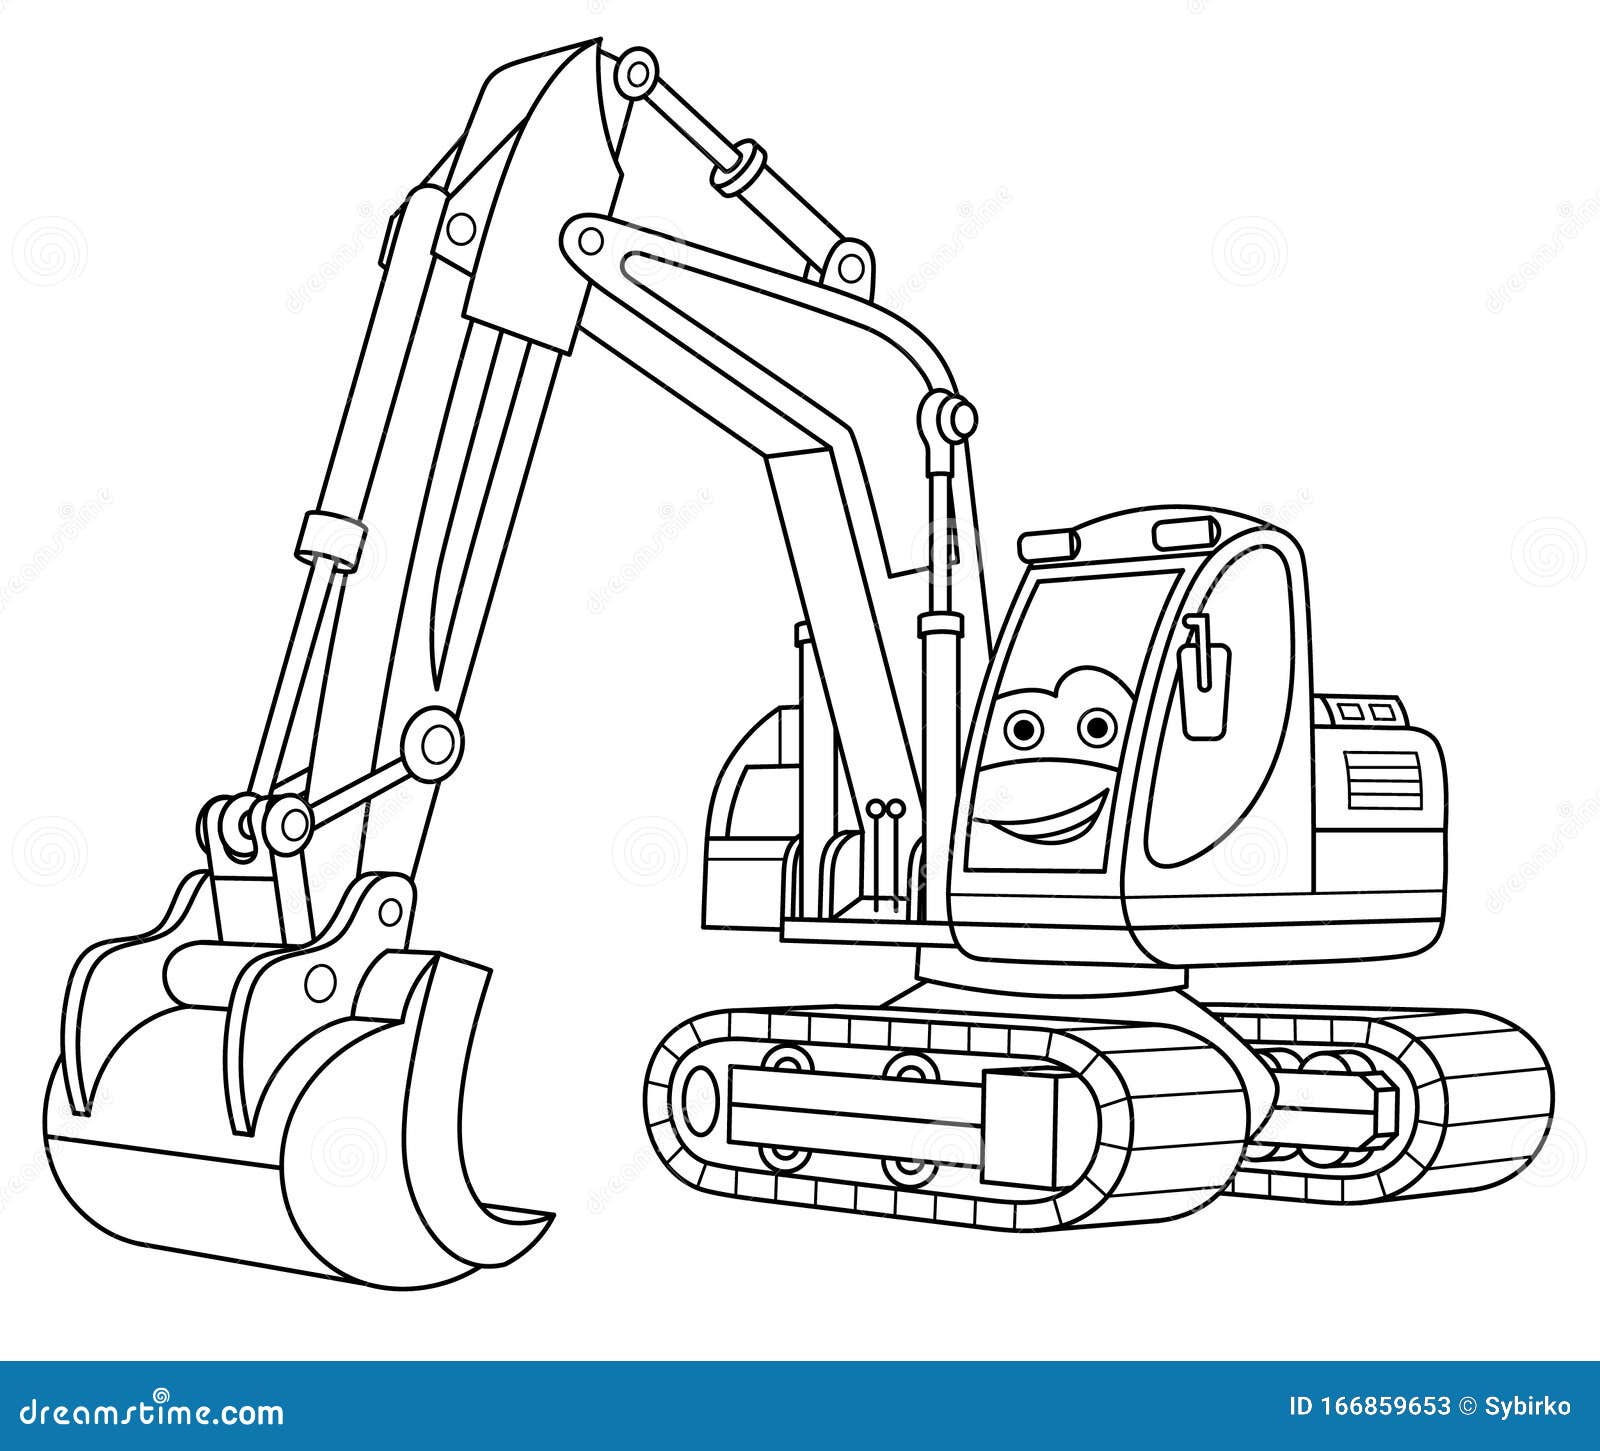 Coloring Page with Excavator Stock Vector   Illustration of ...